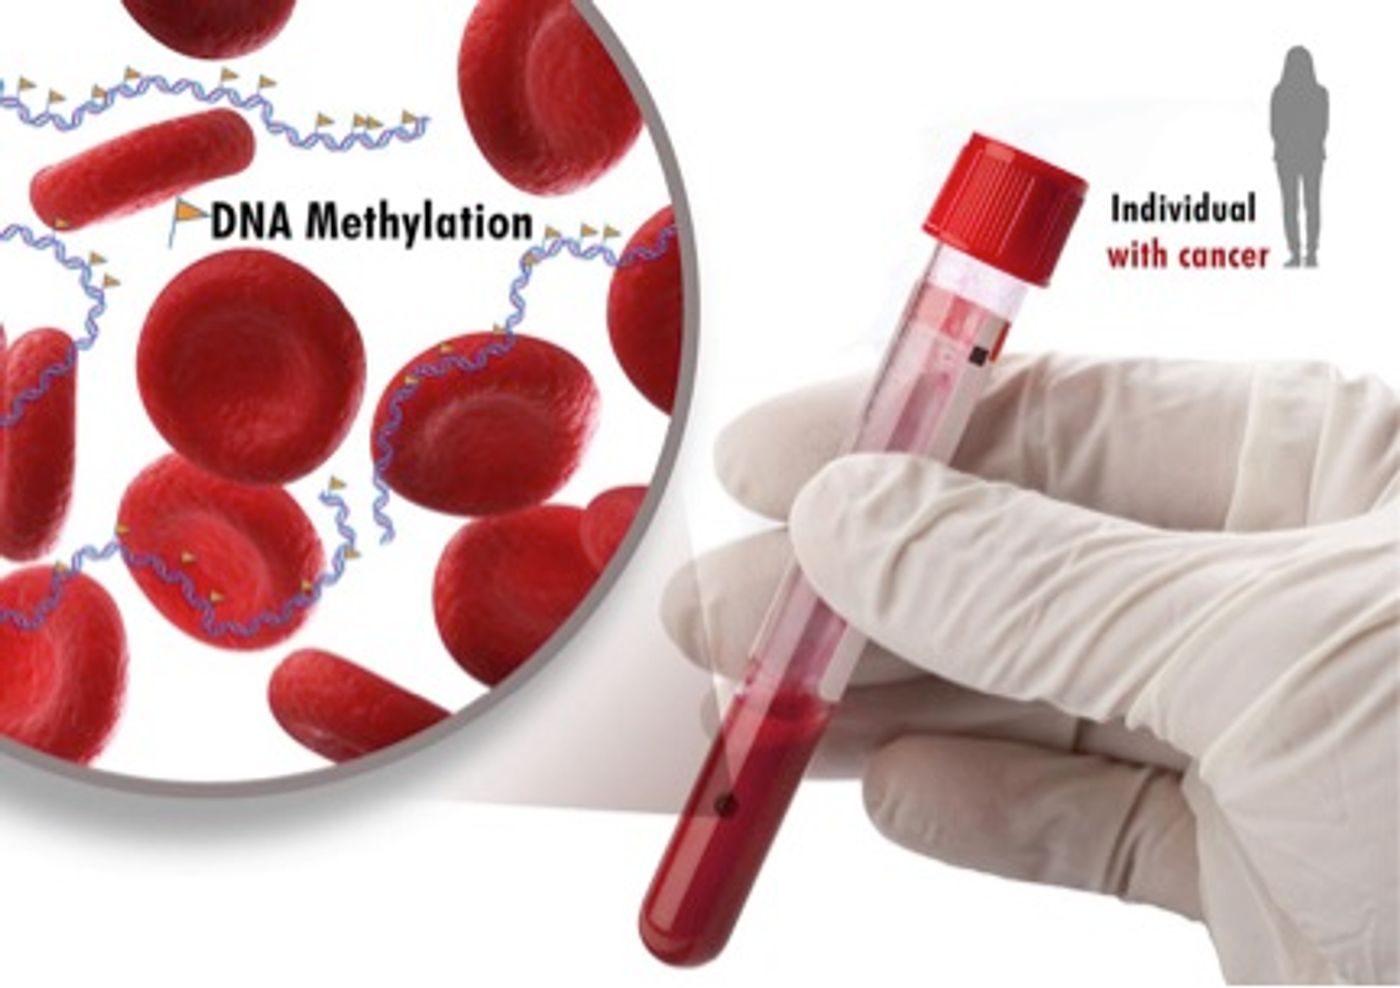 Scientist uncover new cancer methylation mark, diagnostic test possible